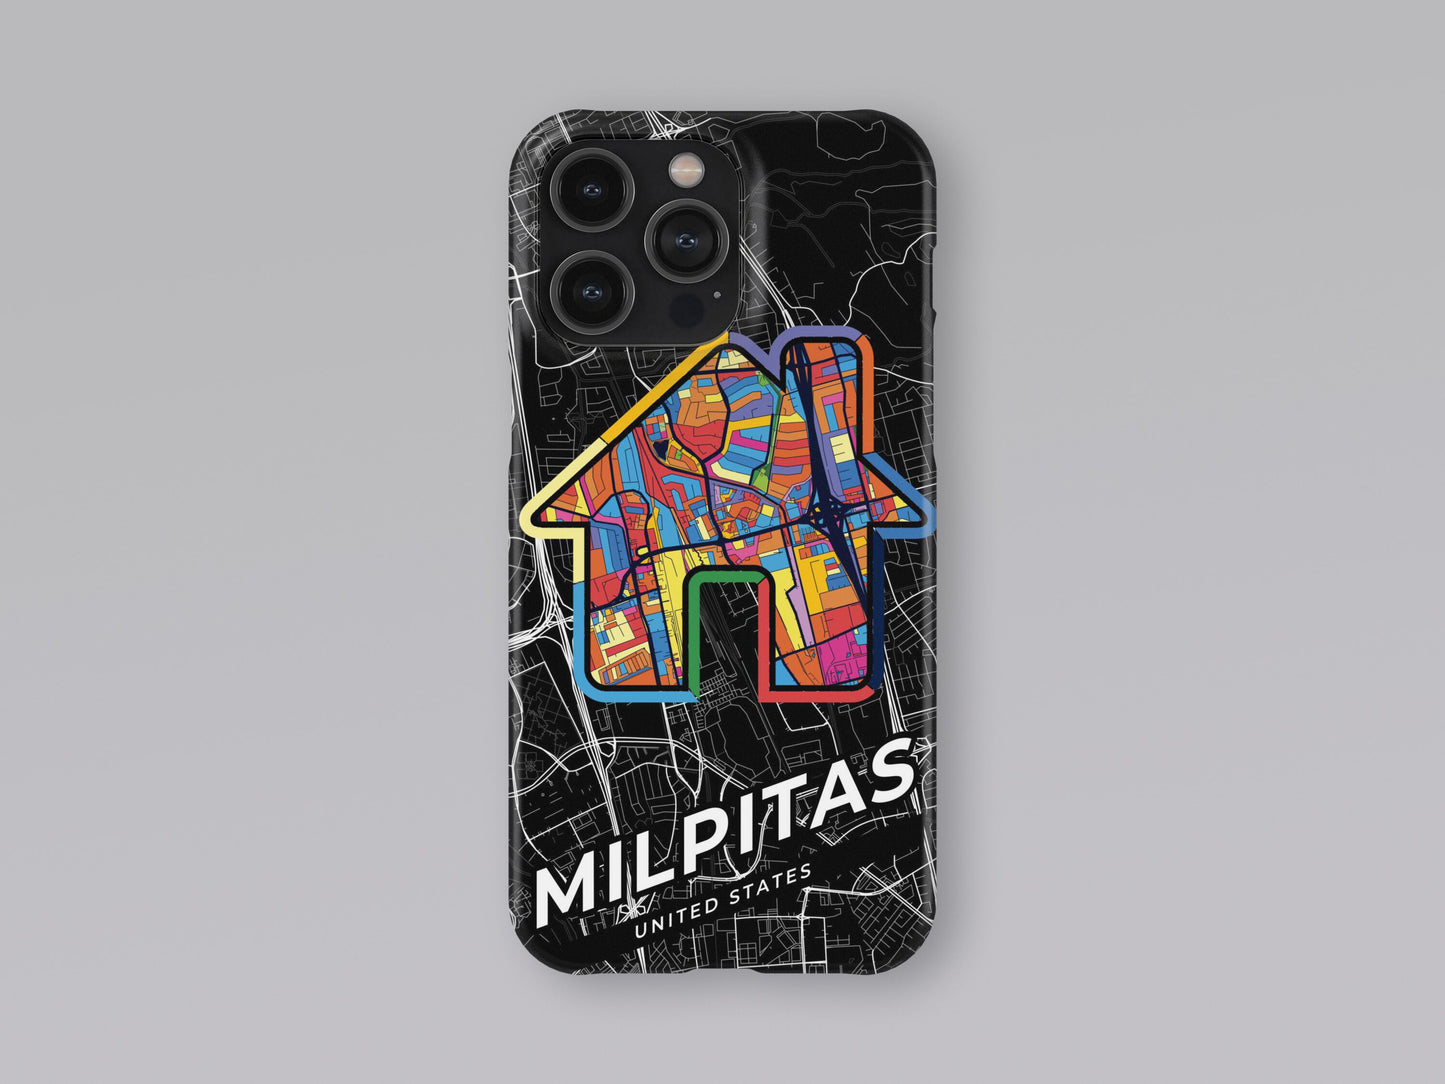 Milpitas California slim phone case with colorful icon 3